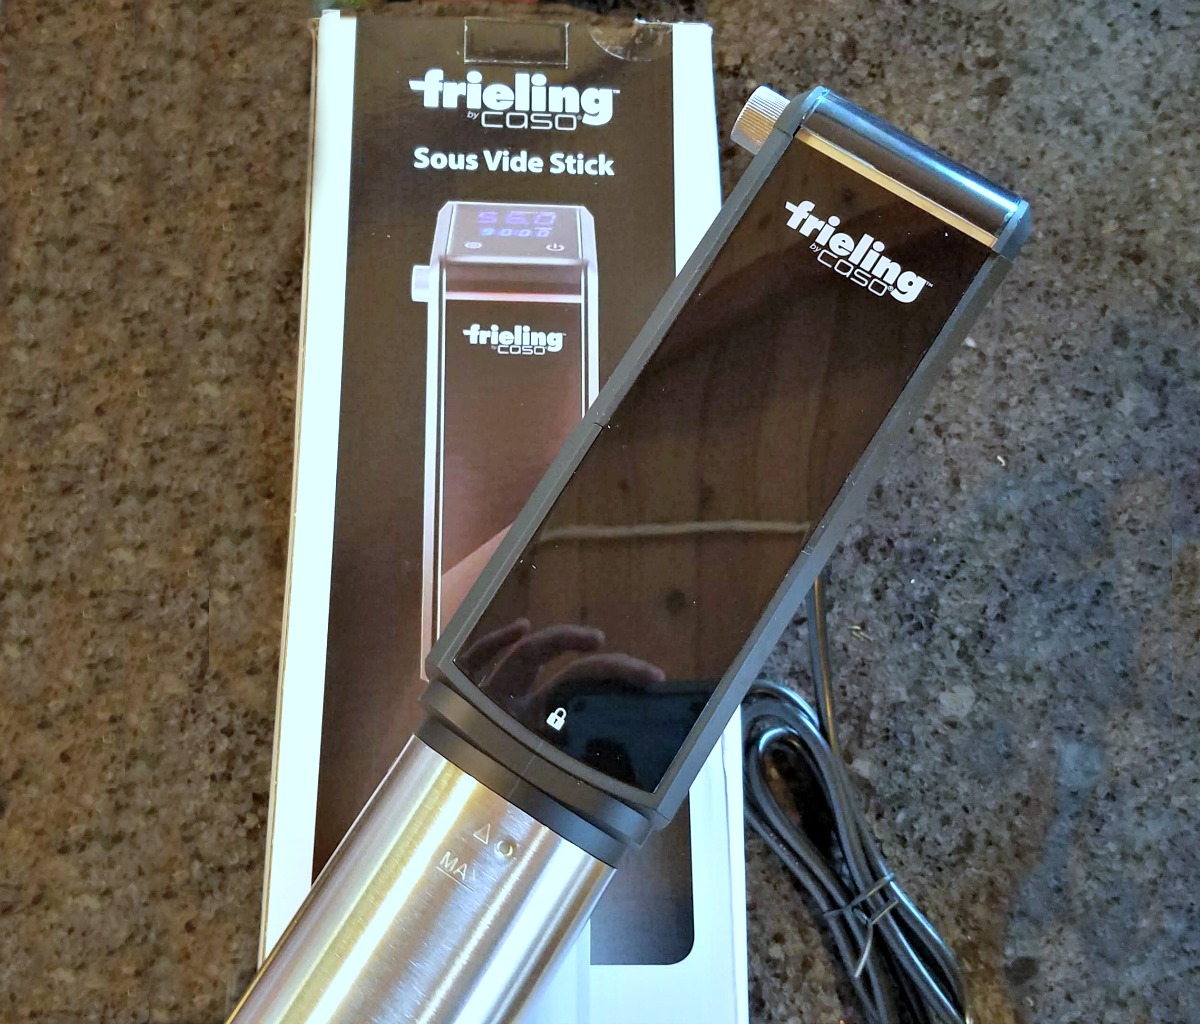 sous vide cooking, cooking sous vide, Frieling, AD